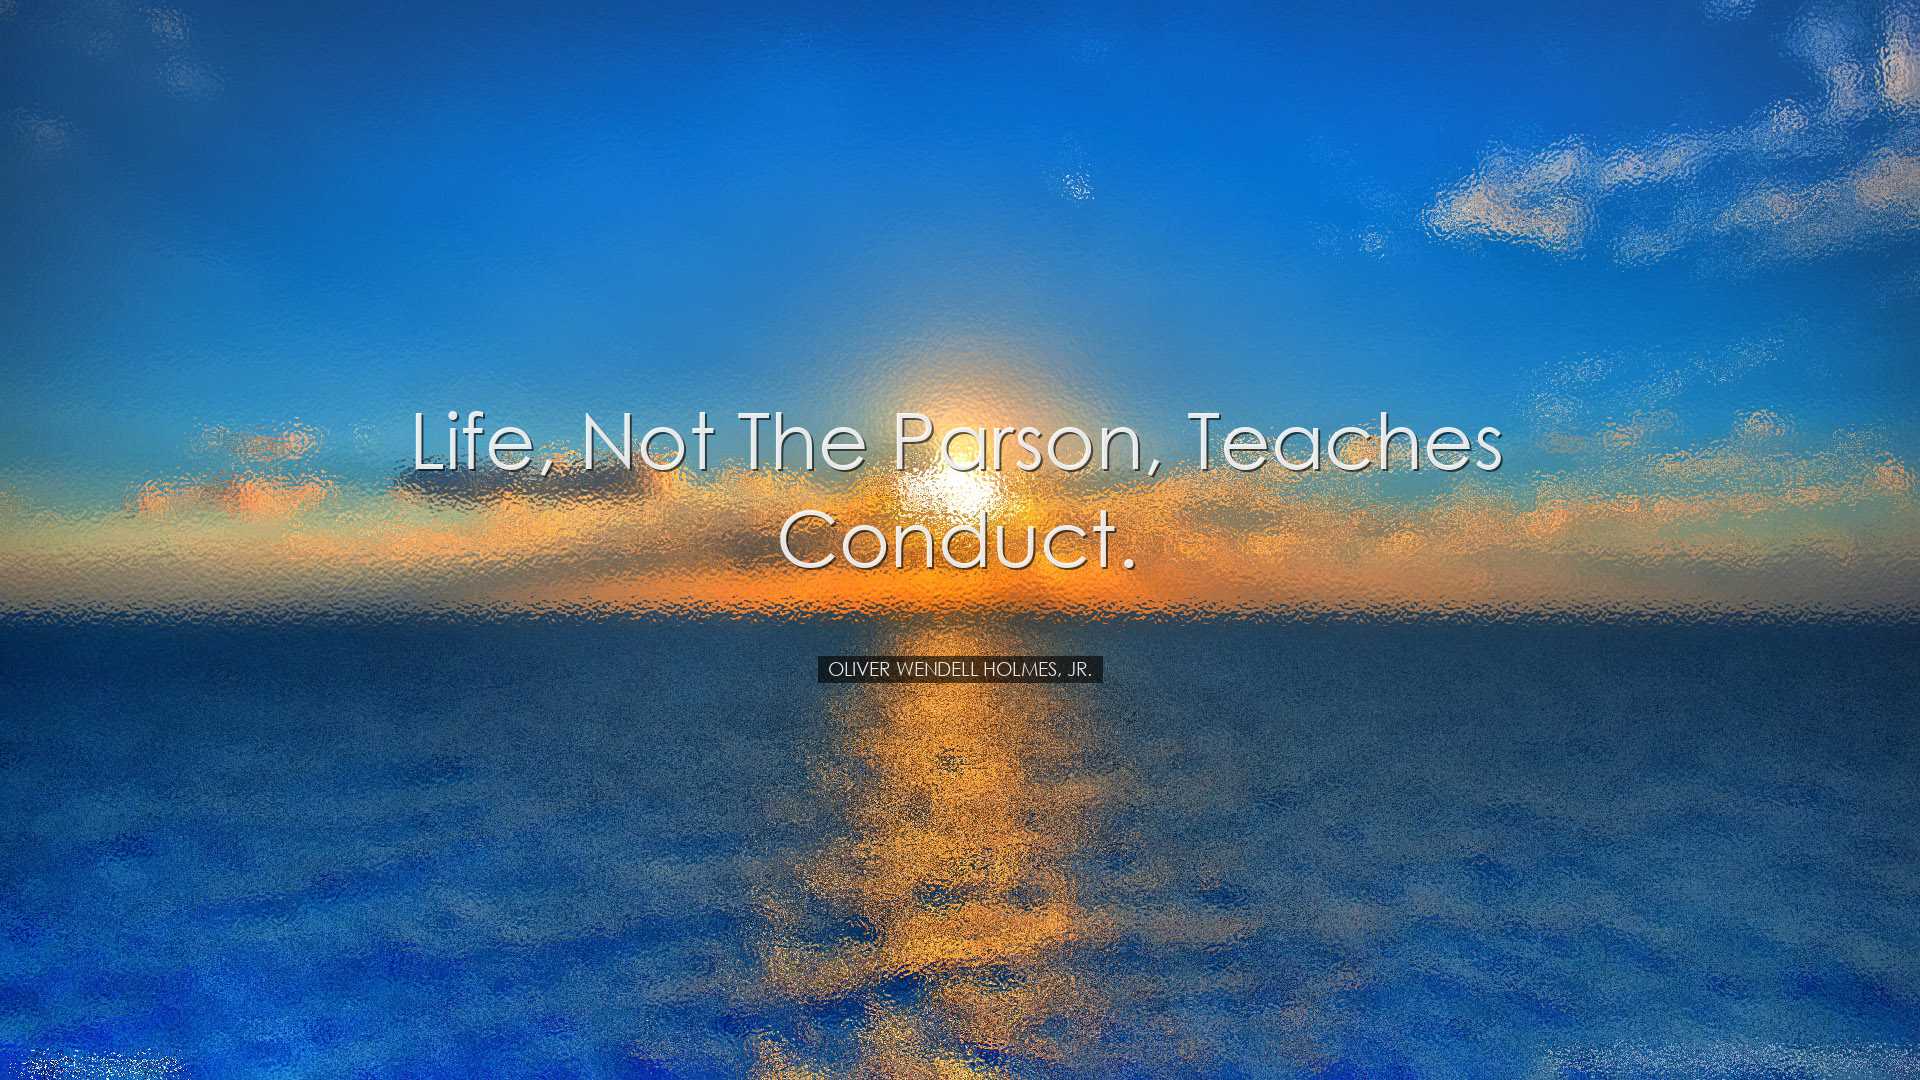 Life, not the parson, teaches conduct. - Oliver Wendell Holmes, Jr